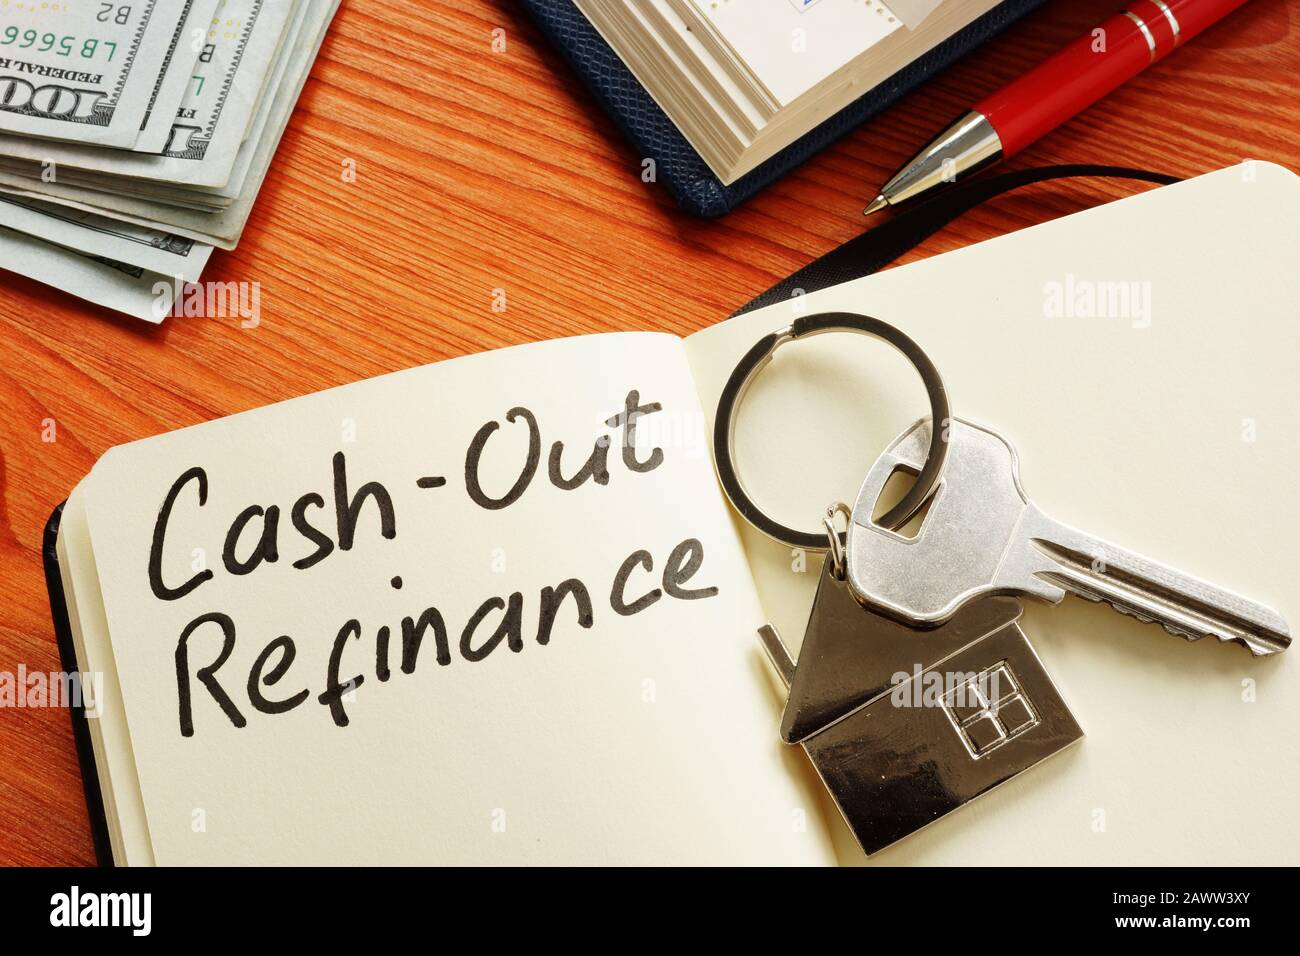 Cash out refinance and key on the notepad. Stock Photo